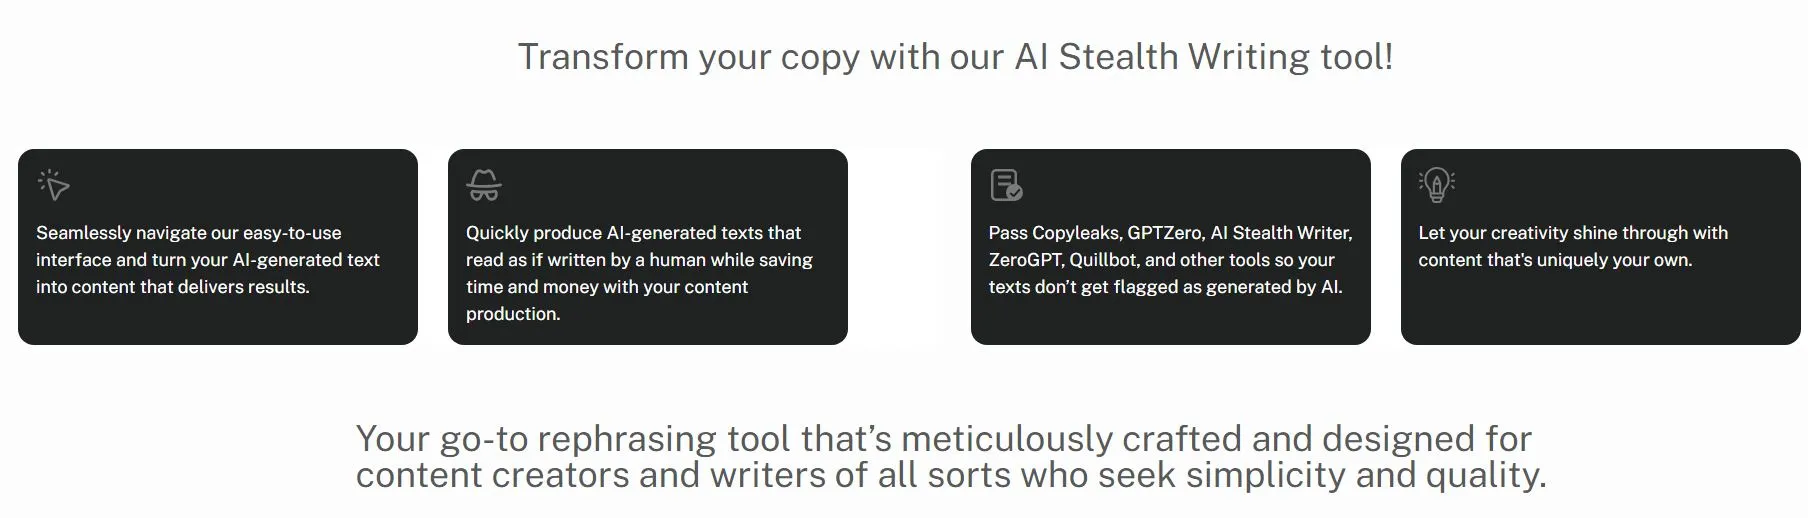 Transform your copy with AI Stealth writer tool